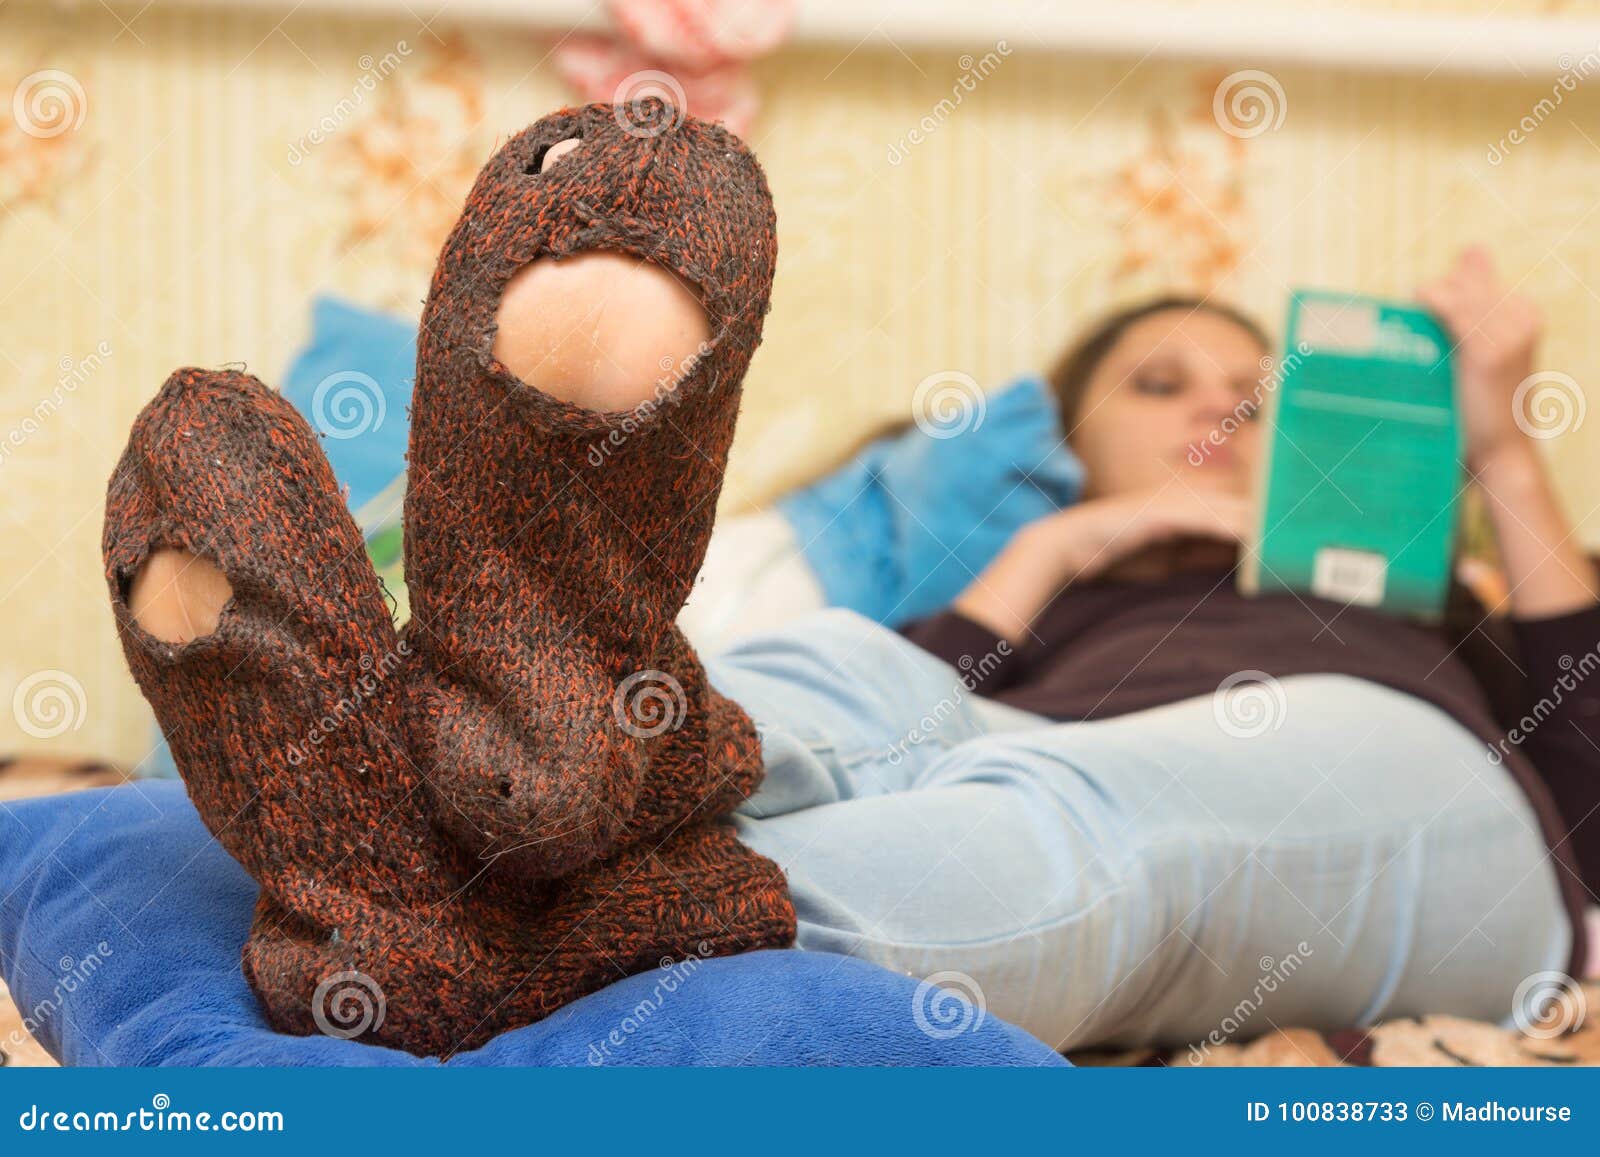 the girl is lying on couch and is reading a book, in the foreground the holey socks